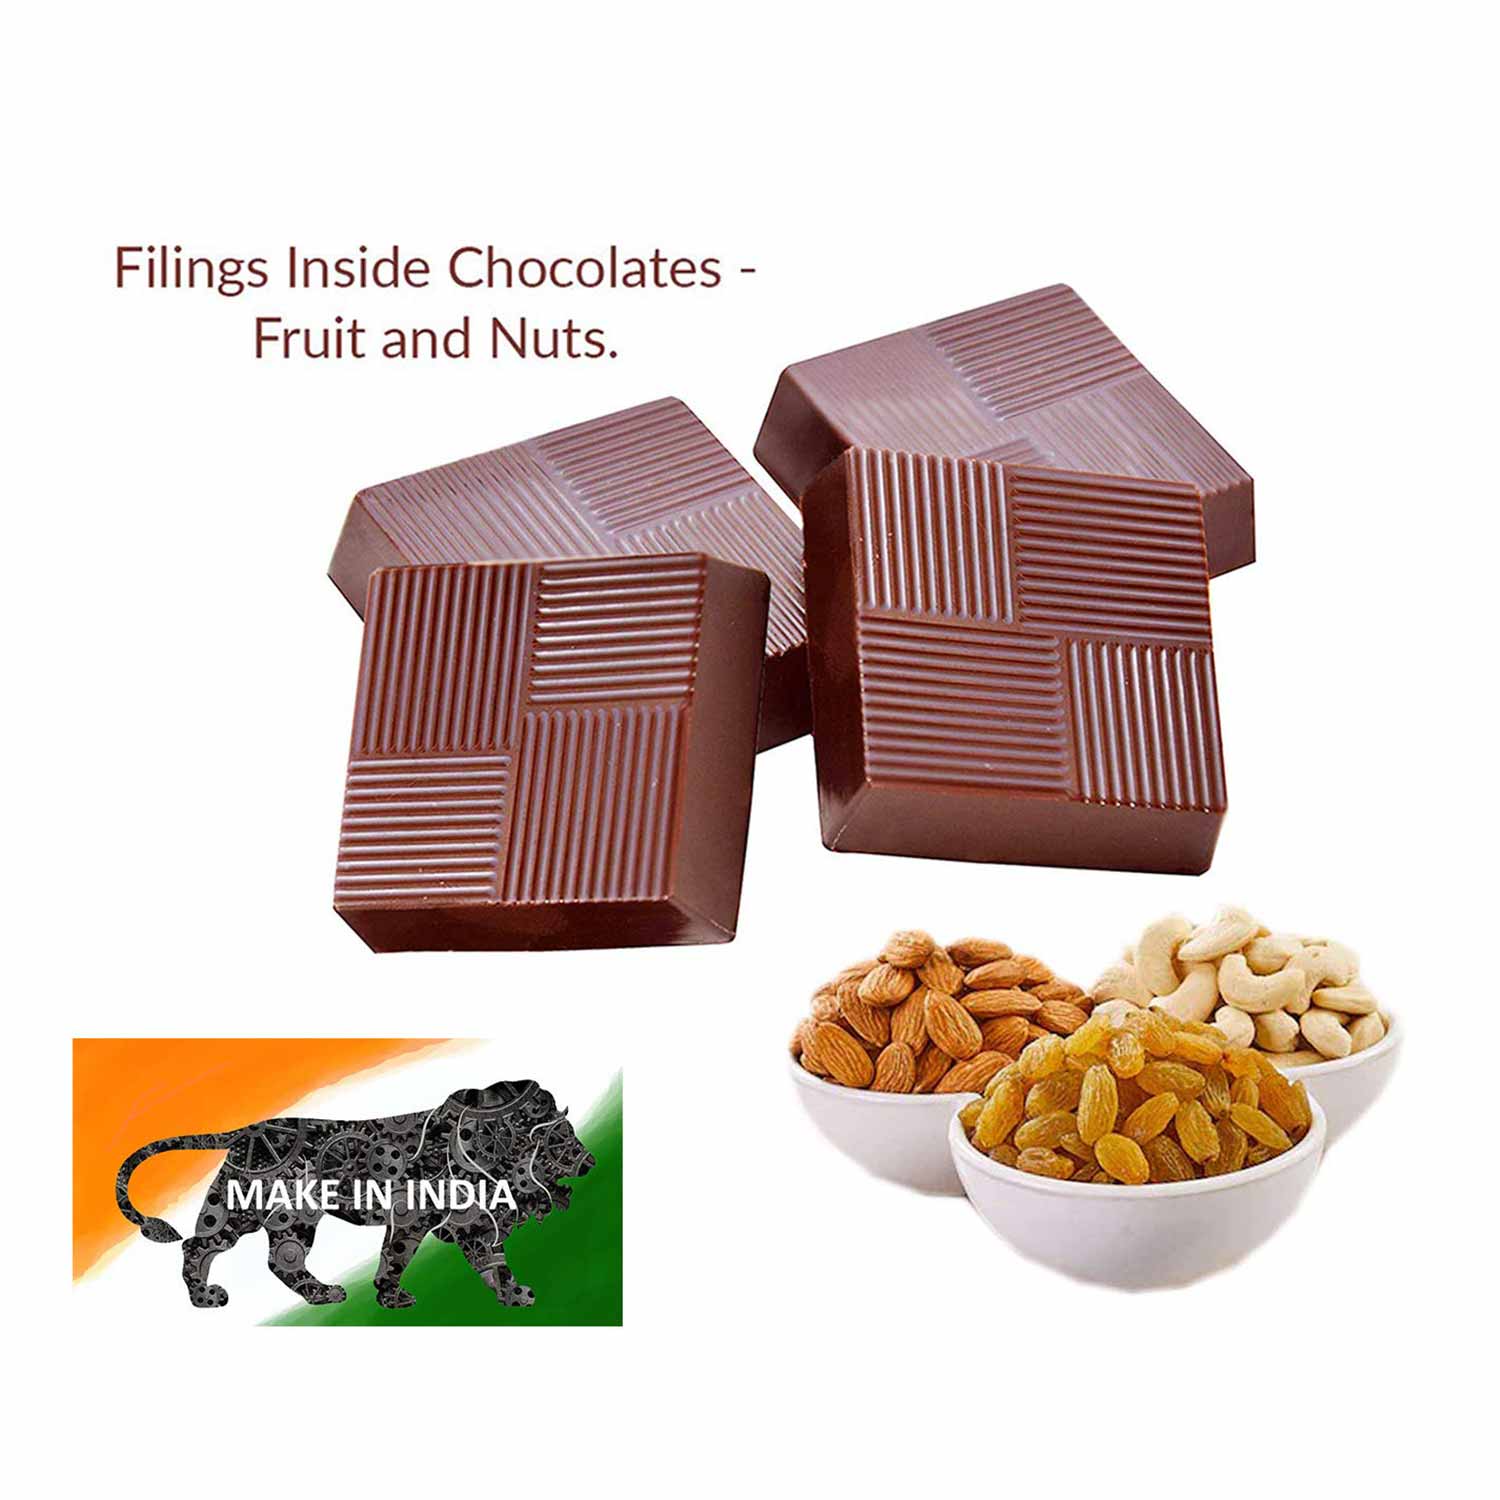 Photo Printed Chocolates with graceful design on box